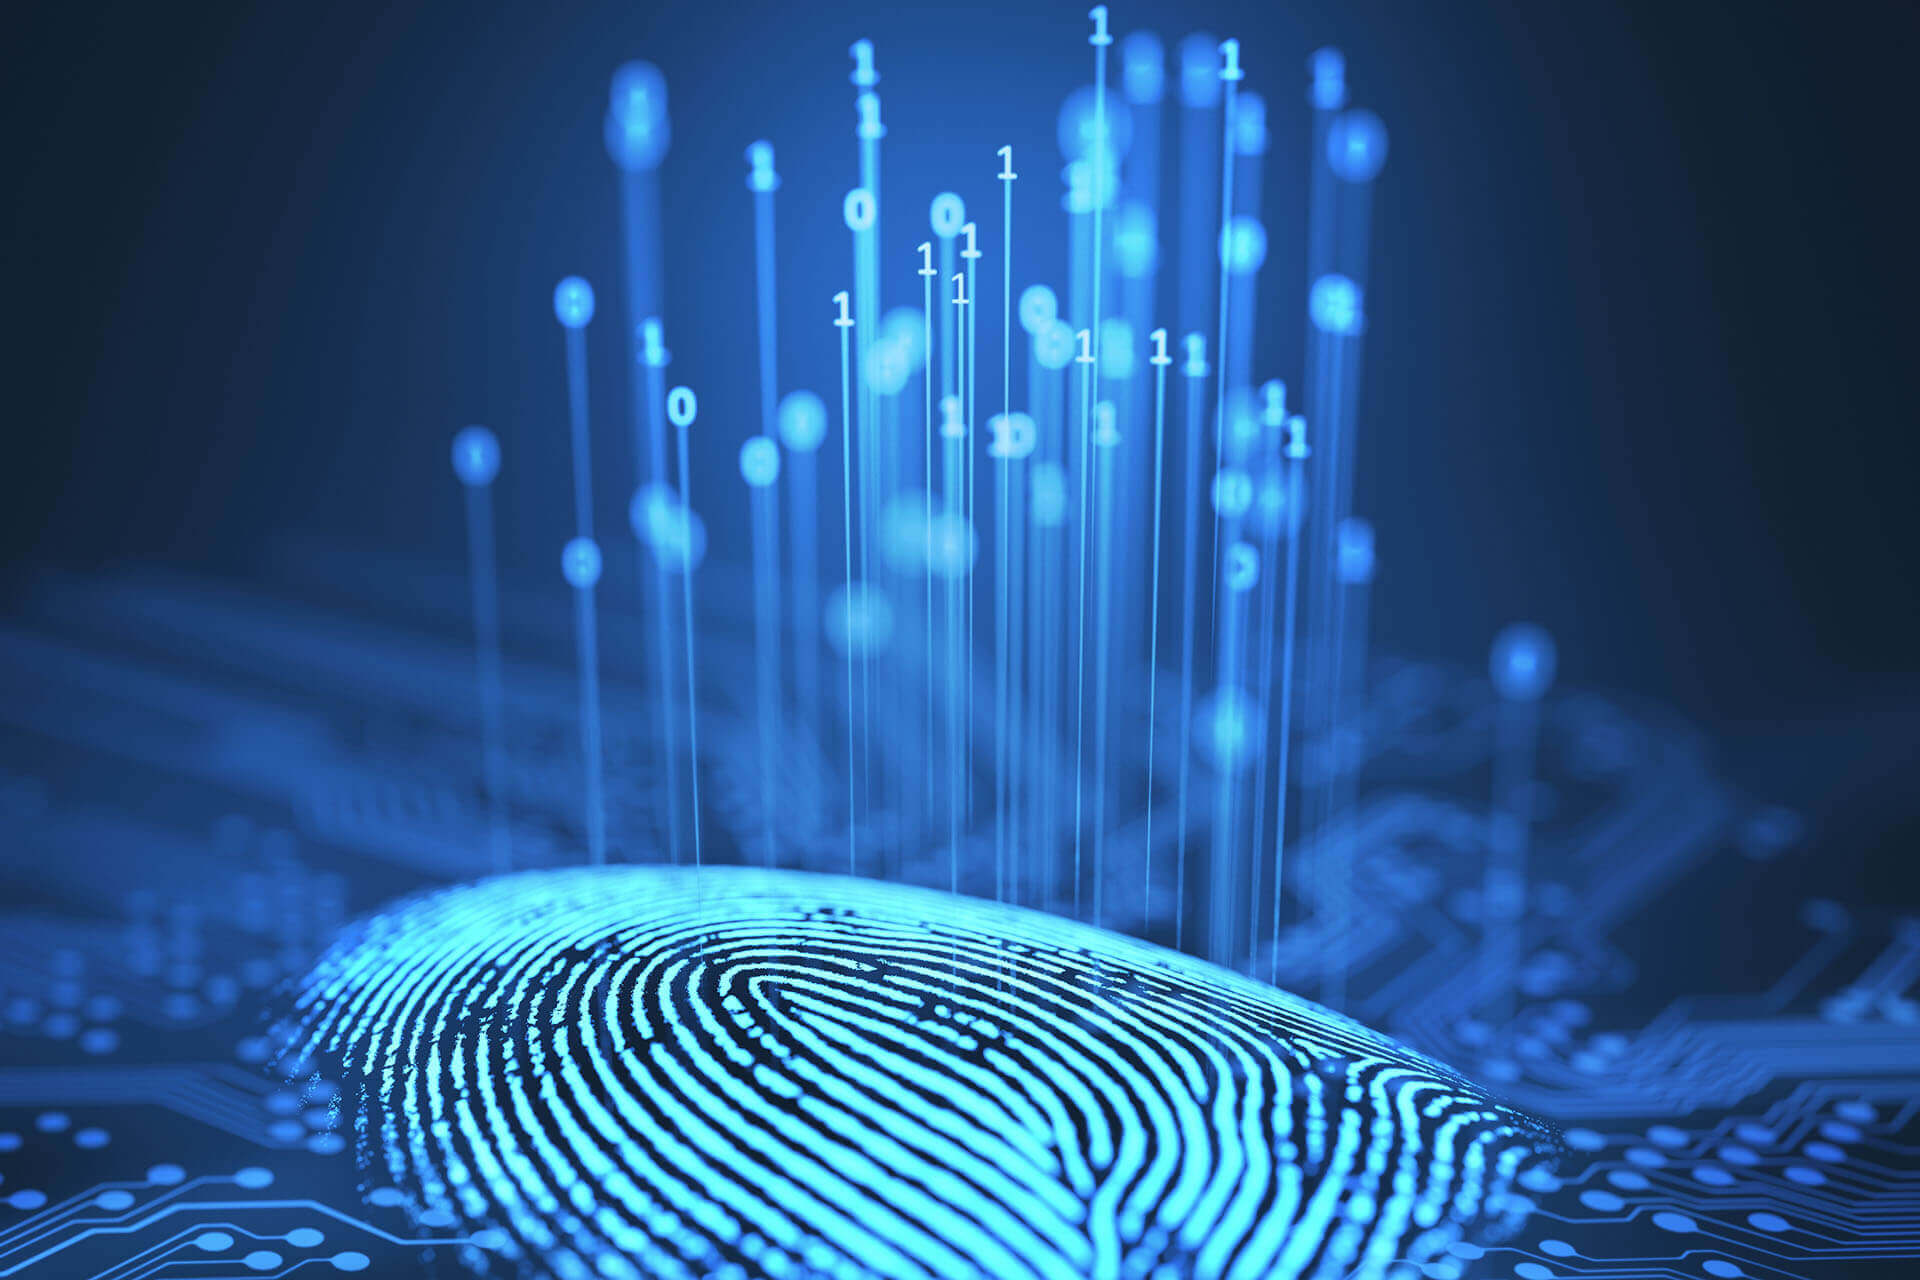 US: Imminent Expansion of Biometrics Requirements